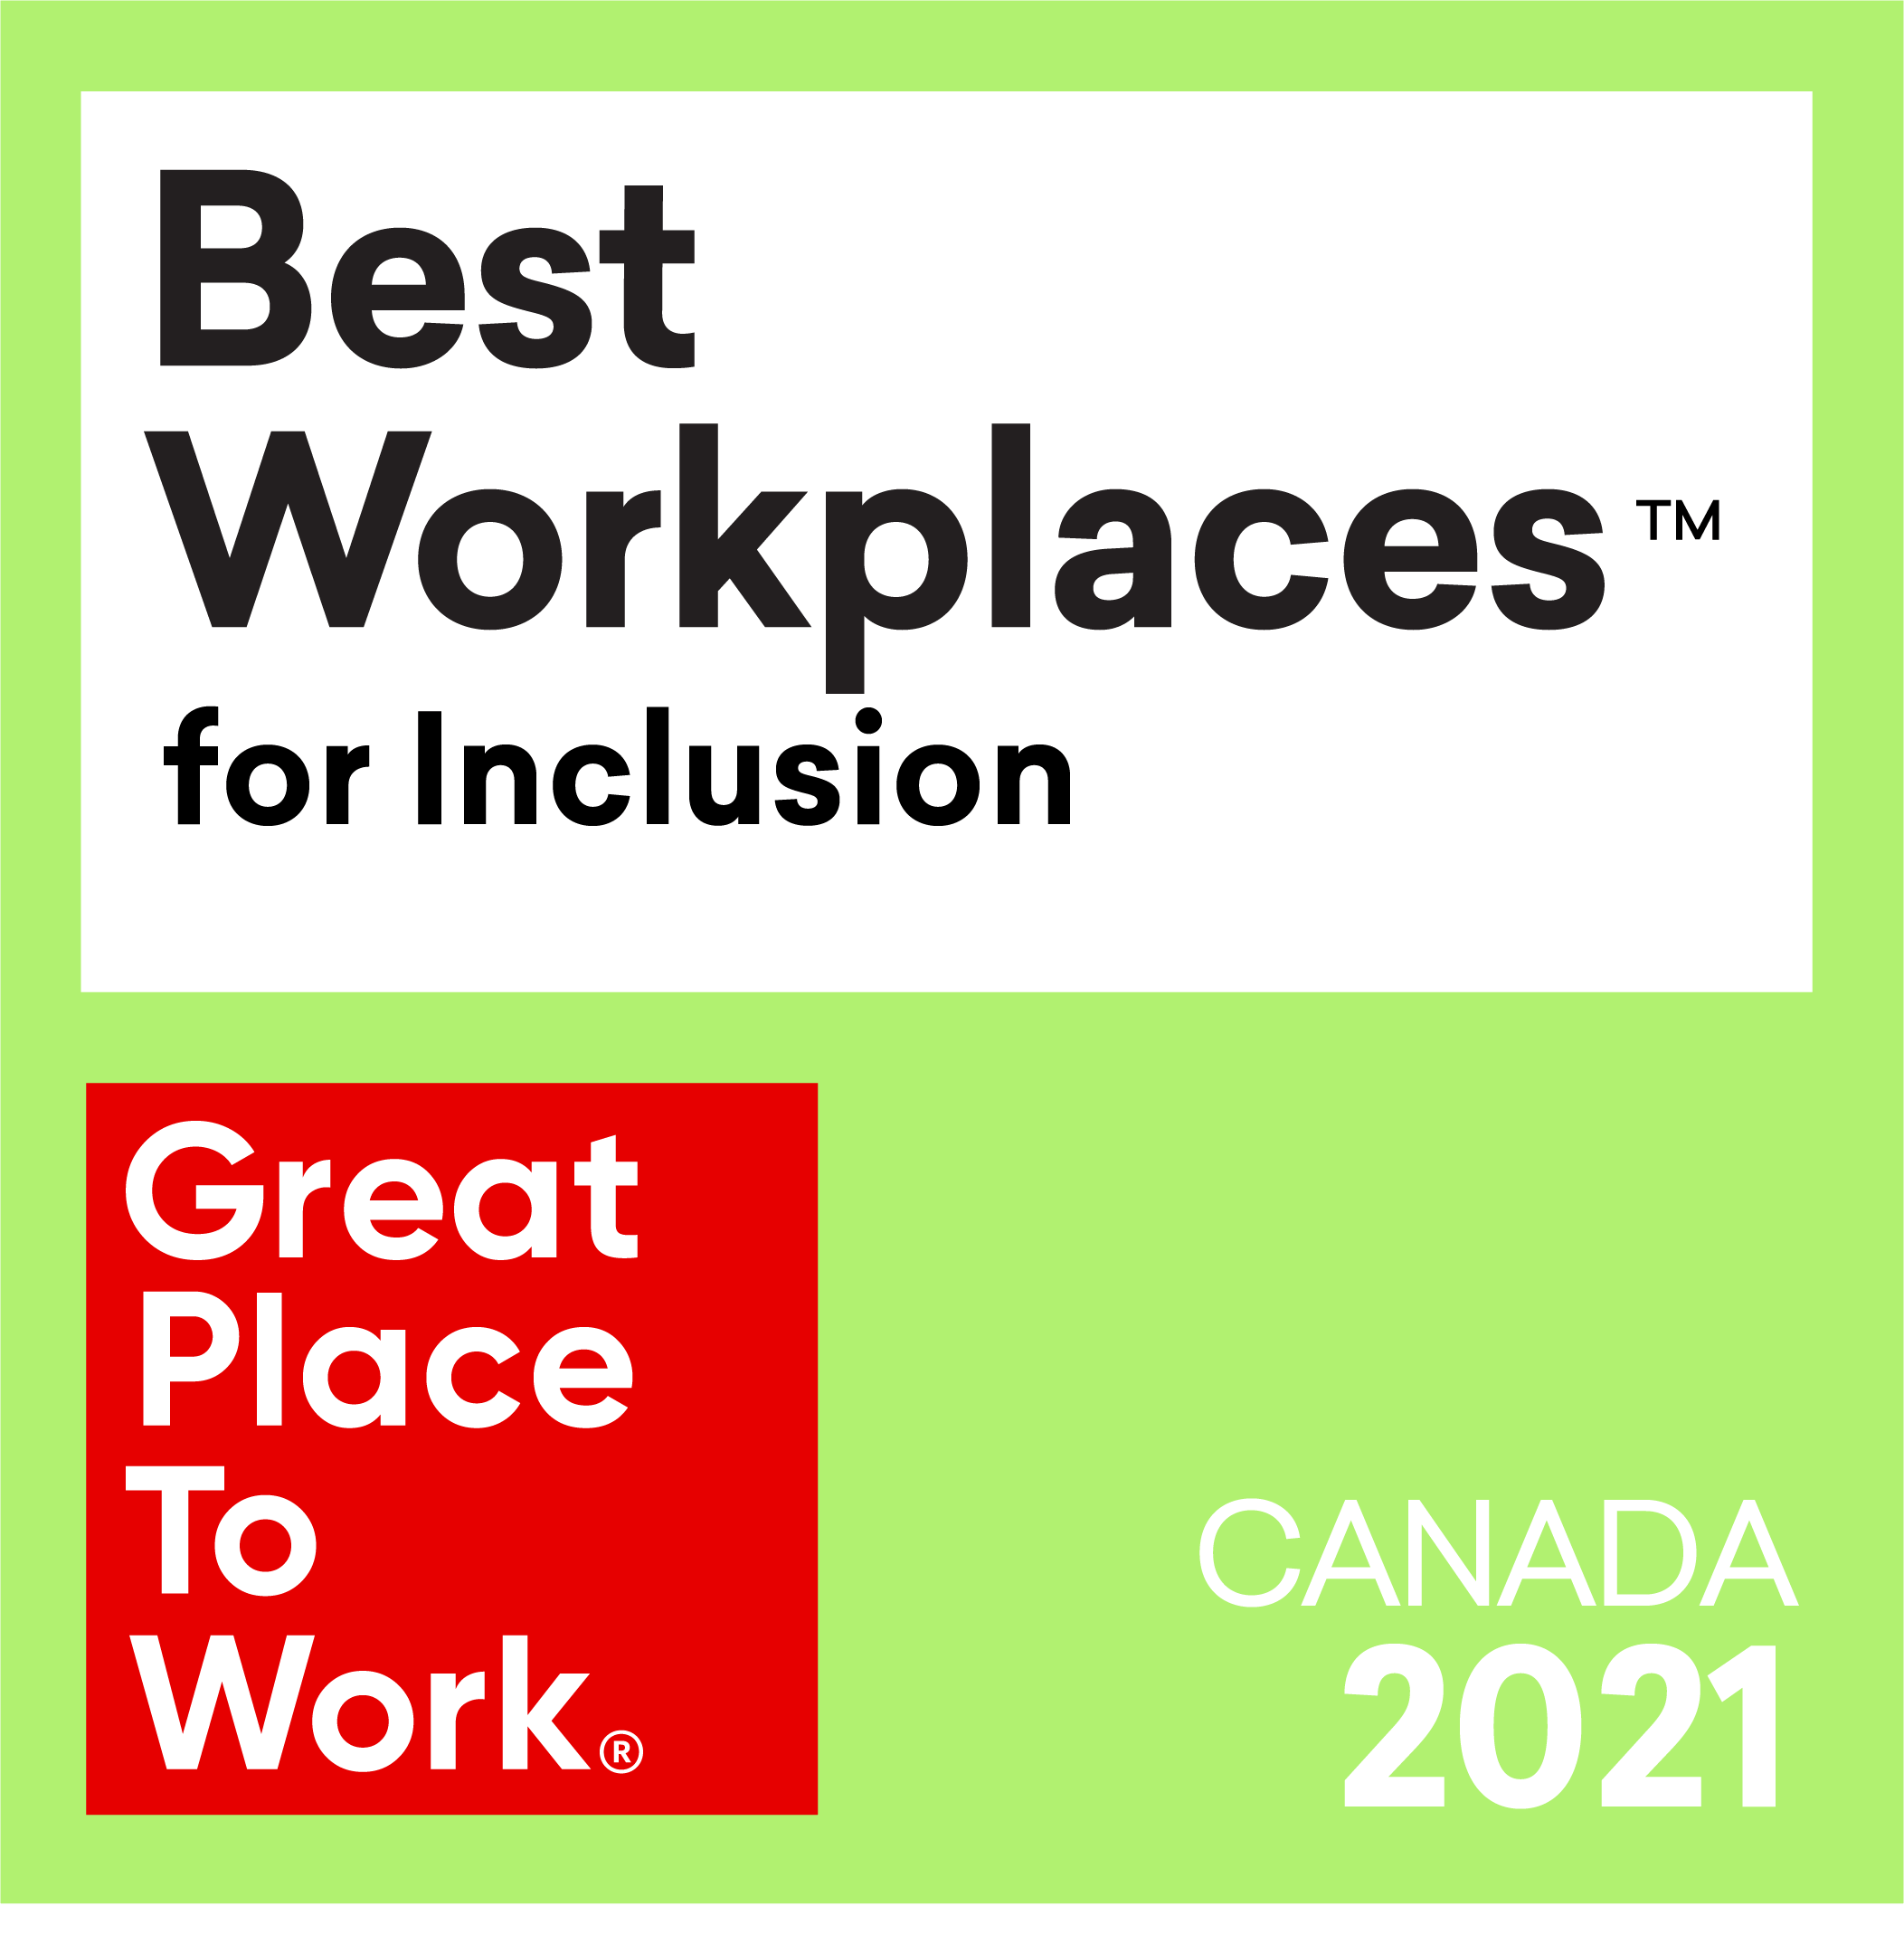 Best workplace for inclusion 2021 award